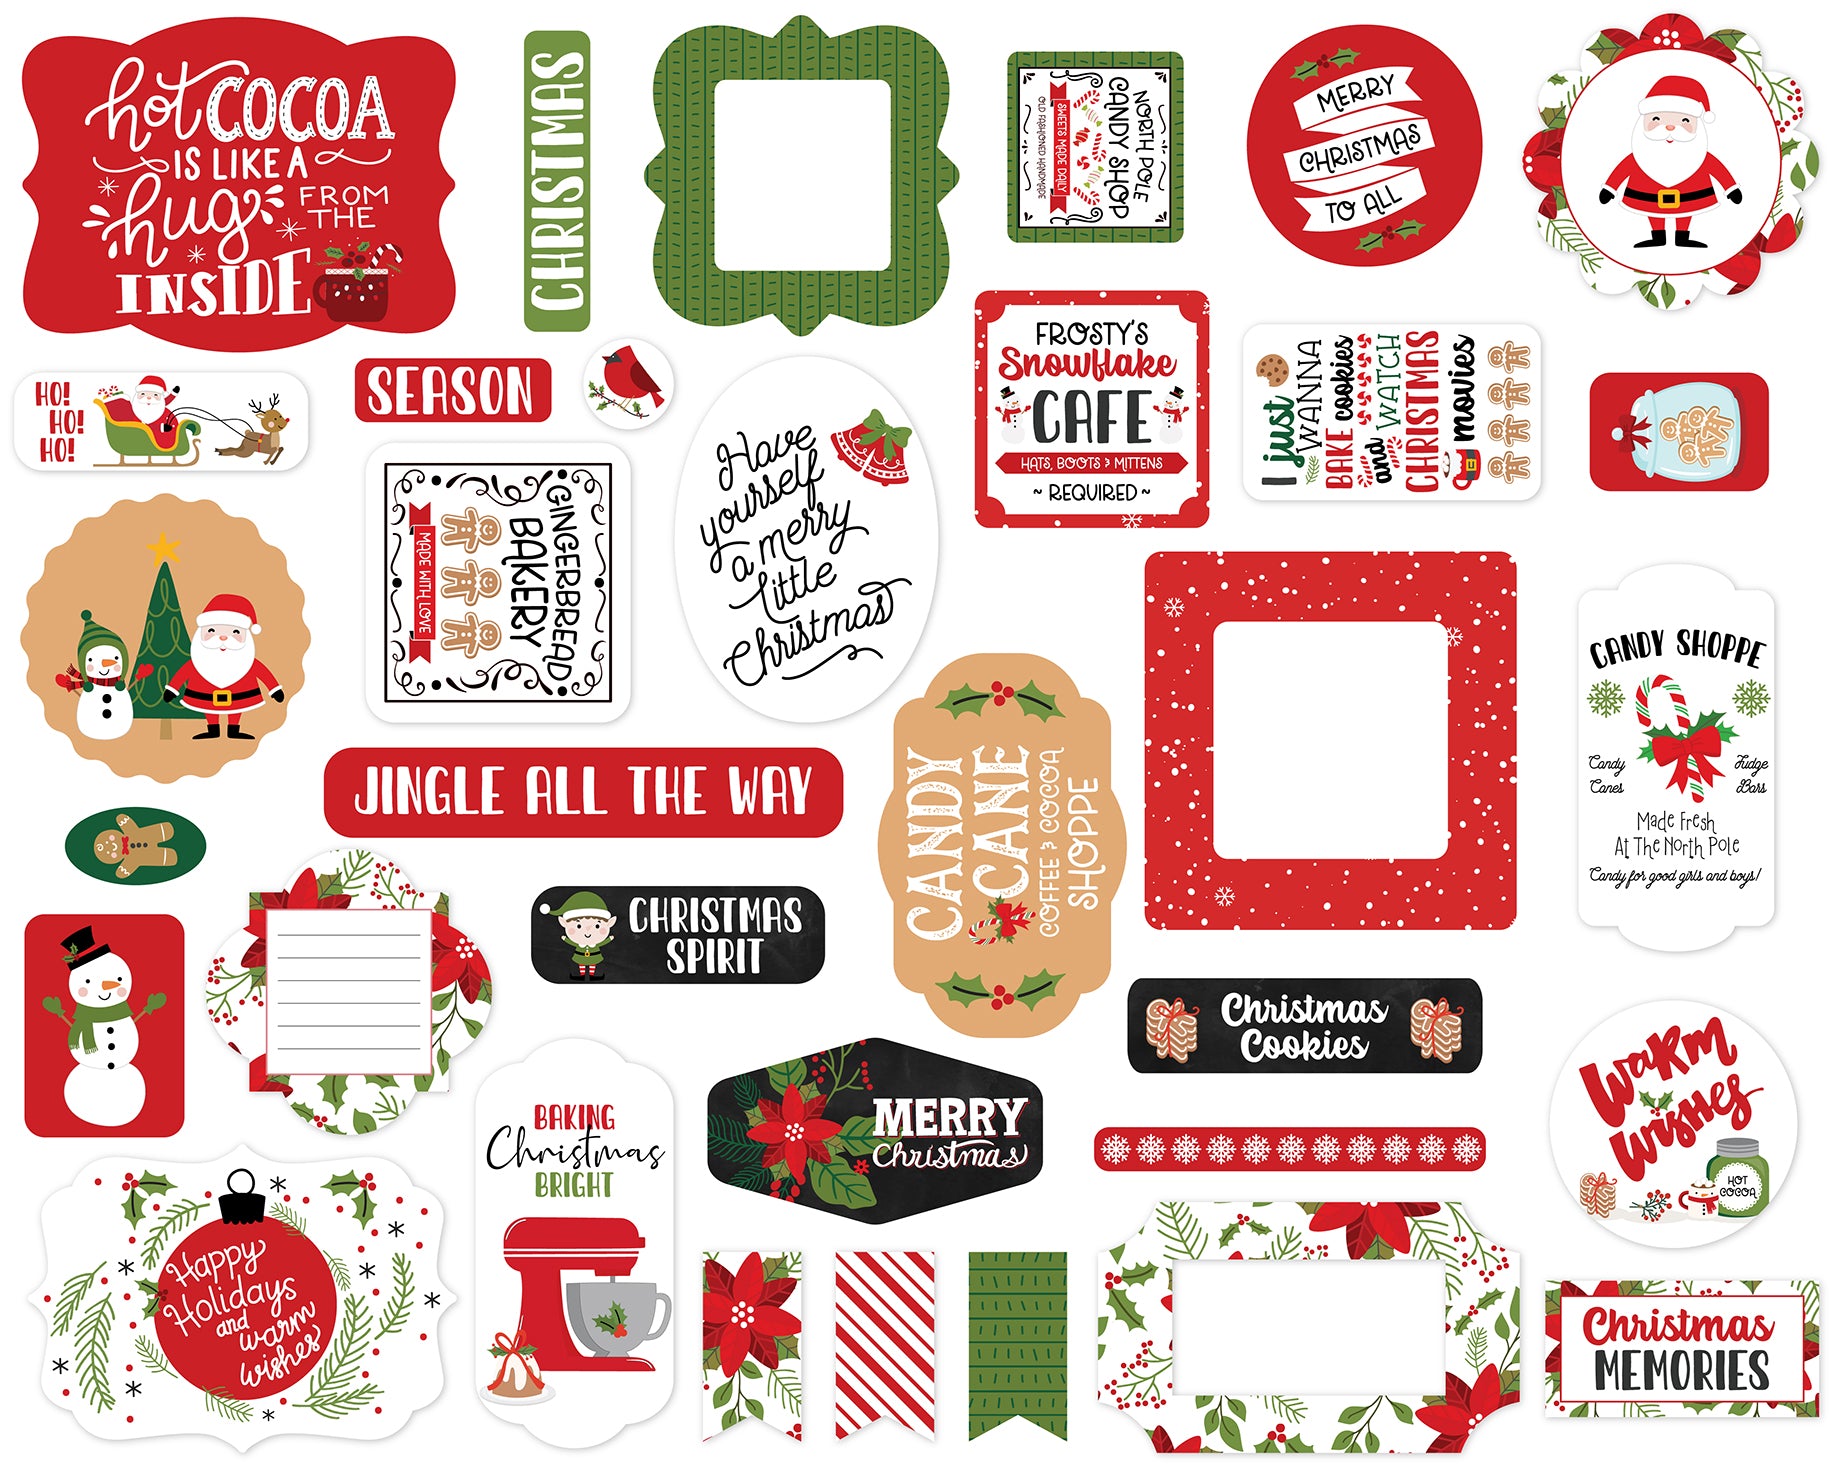 Have A Holly Jolly Christmas Collection 4 x 8 Scrapbook Ephemera by Echo Park Paper